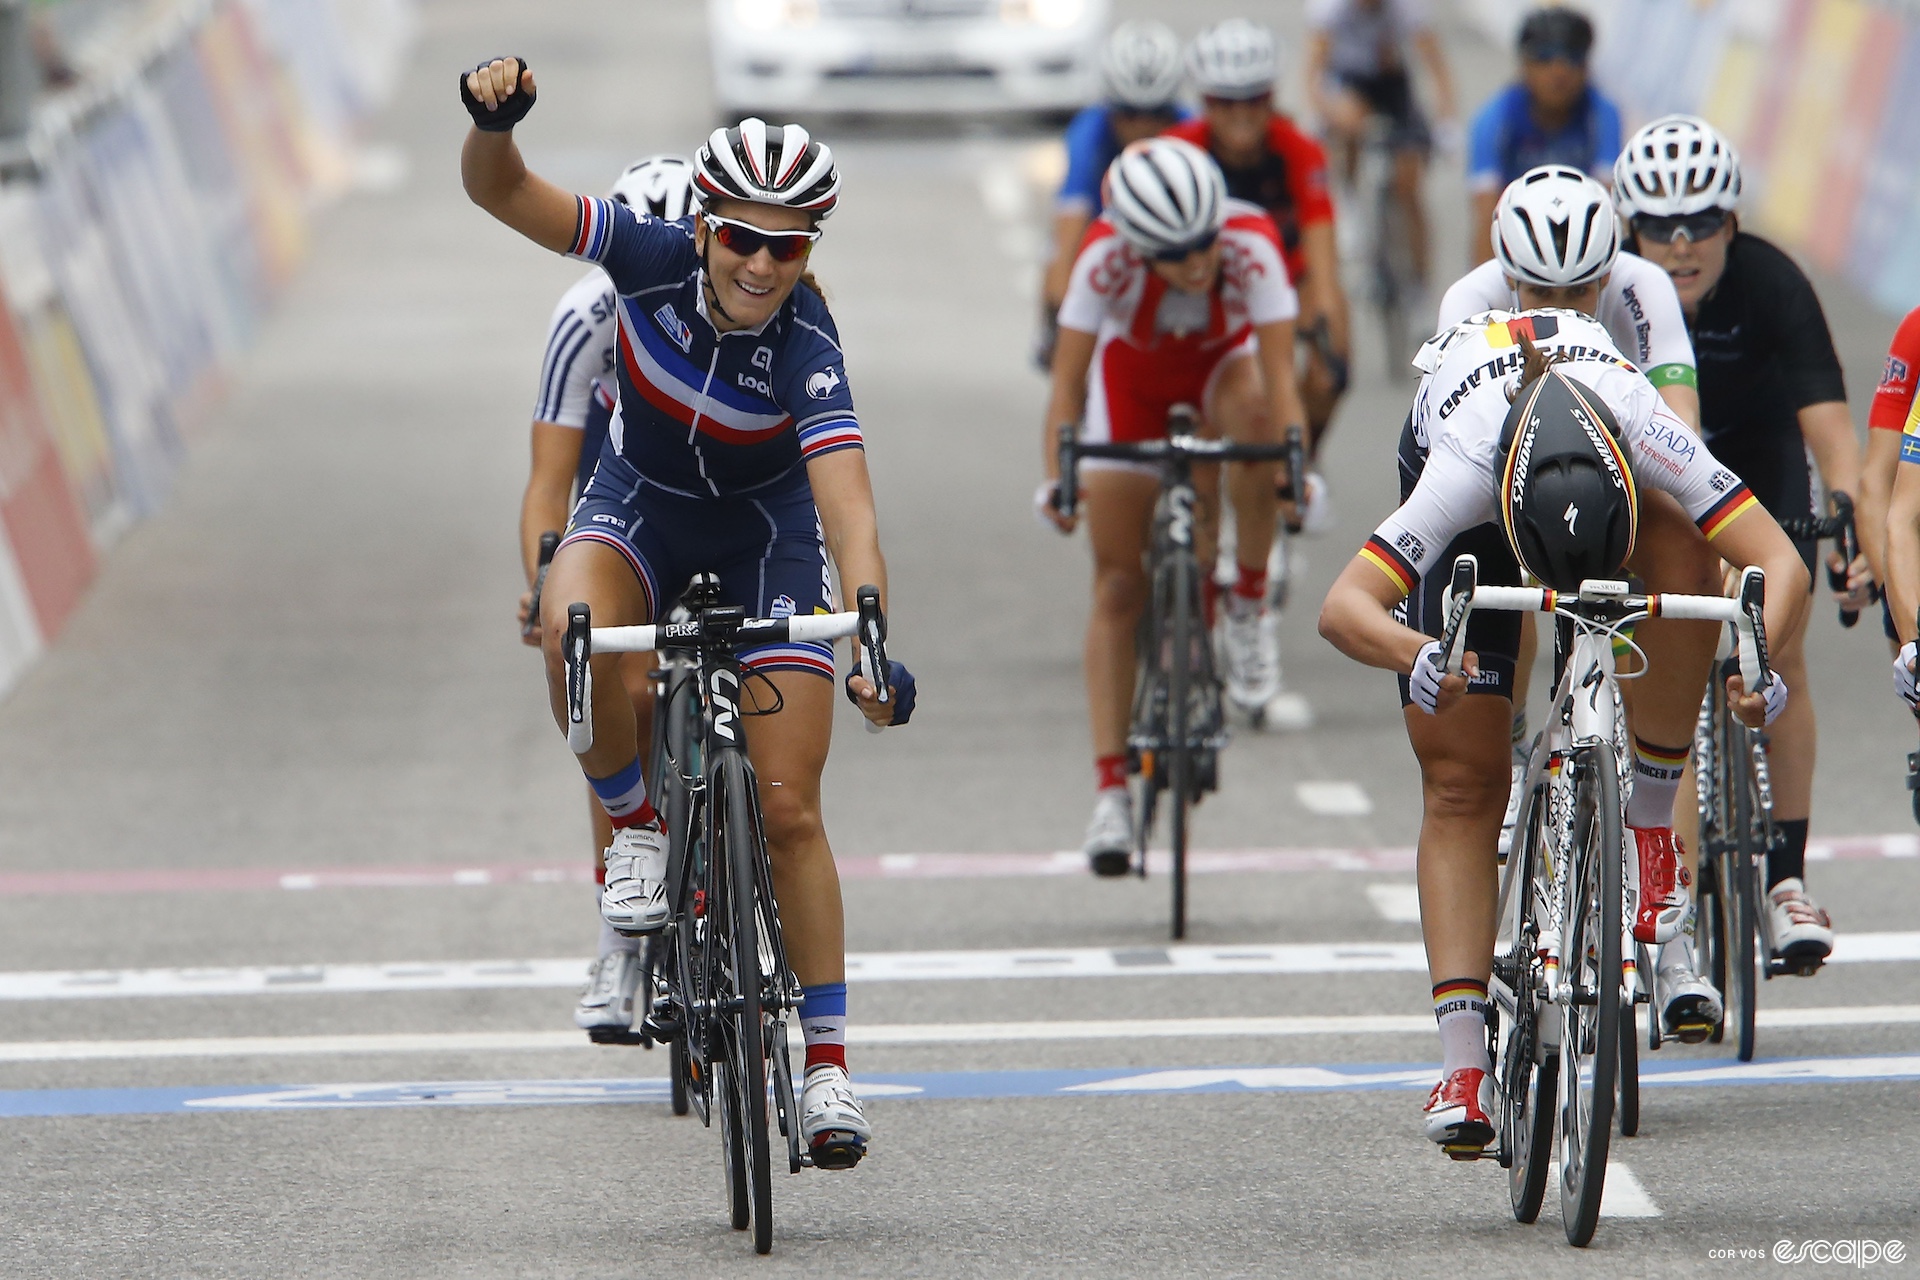 Pauline Ferrand Prevot raises her arm in victory after winning the 2014 road world title.